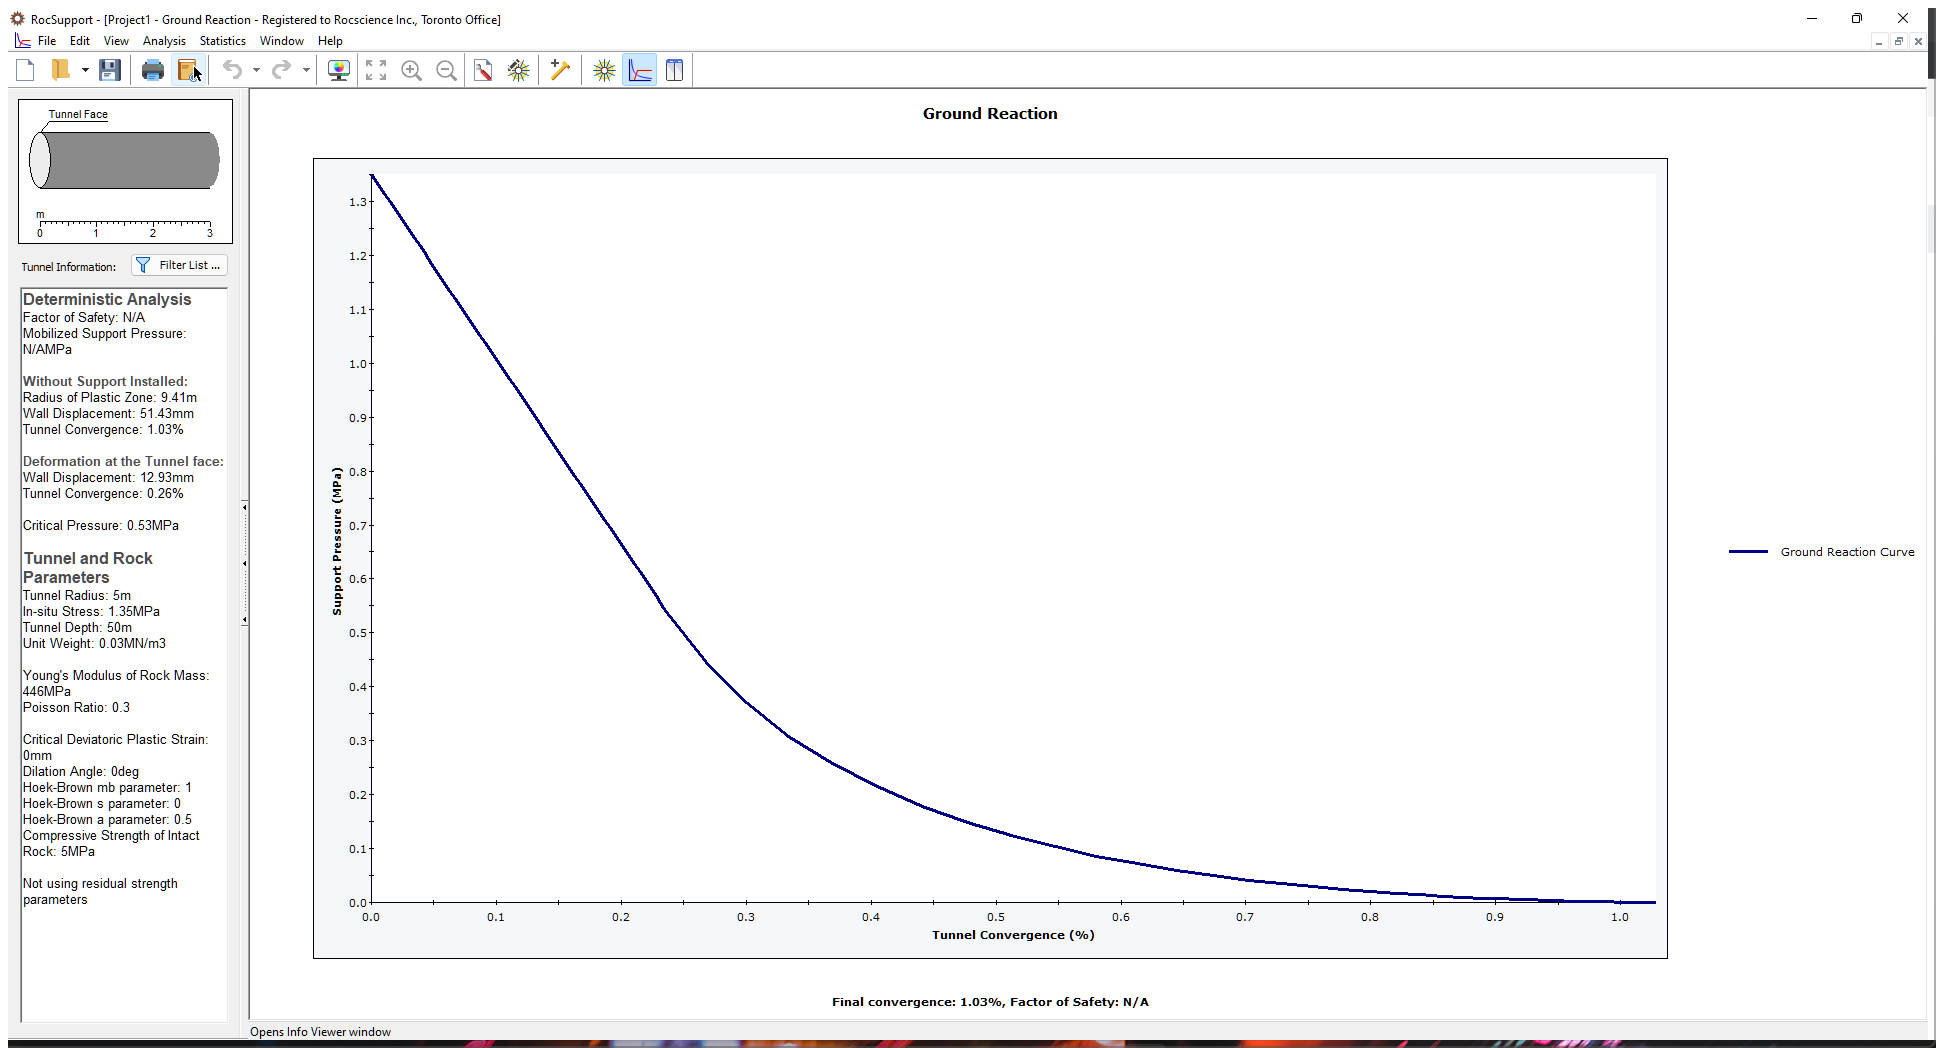 Ground reaction curve view